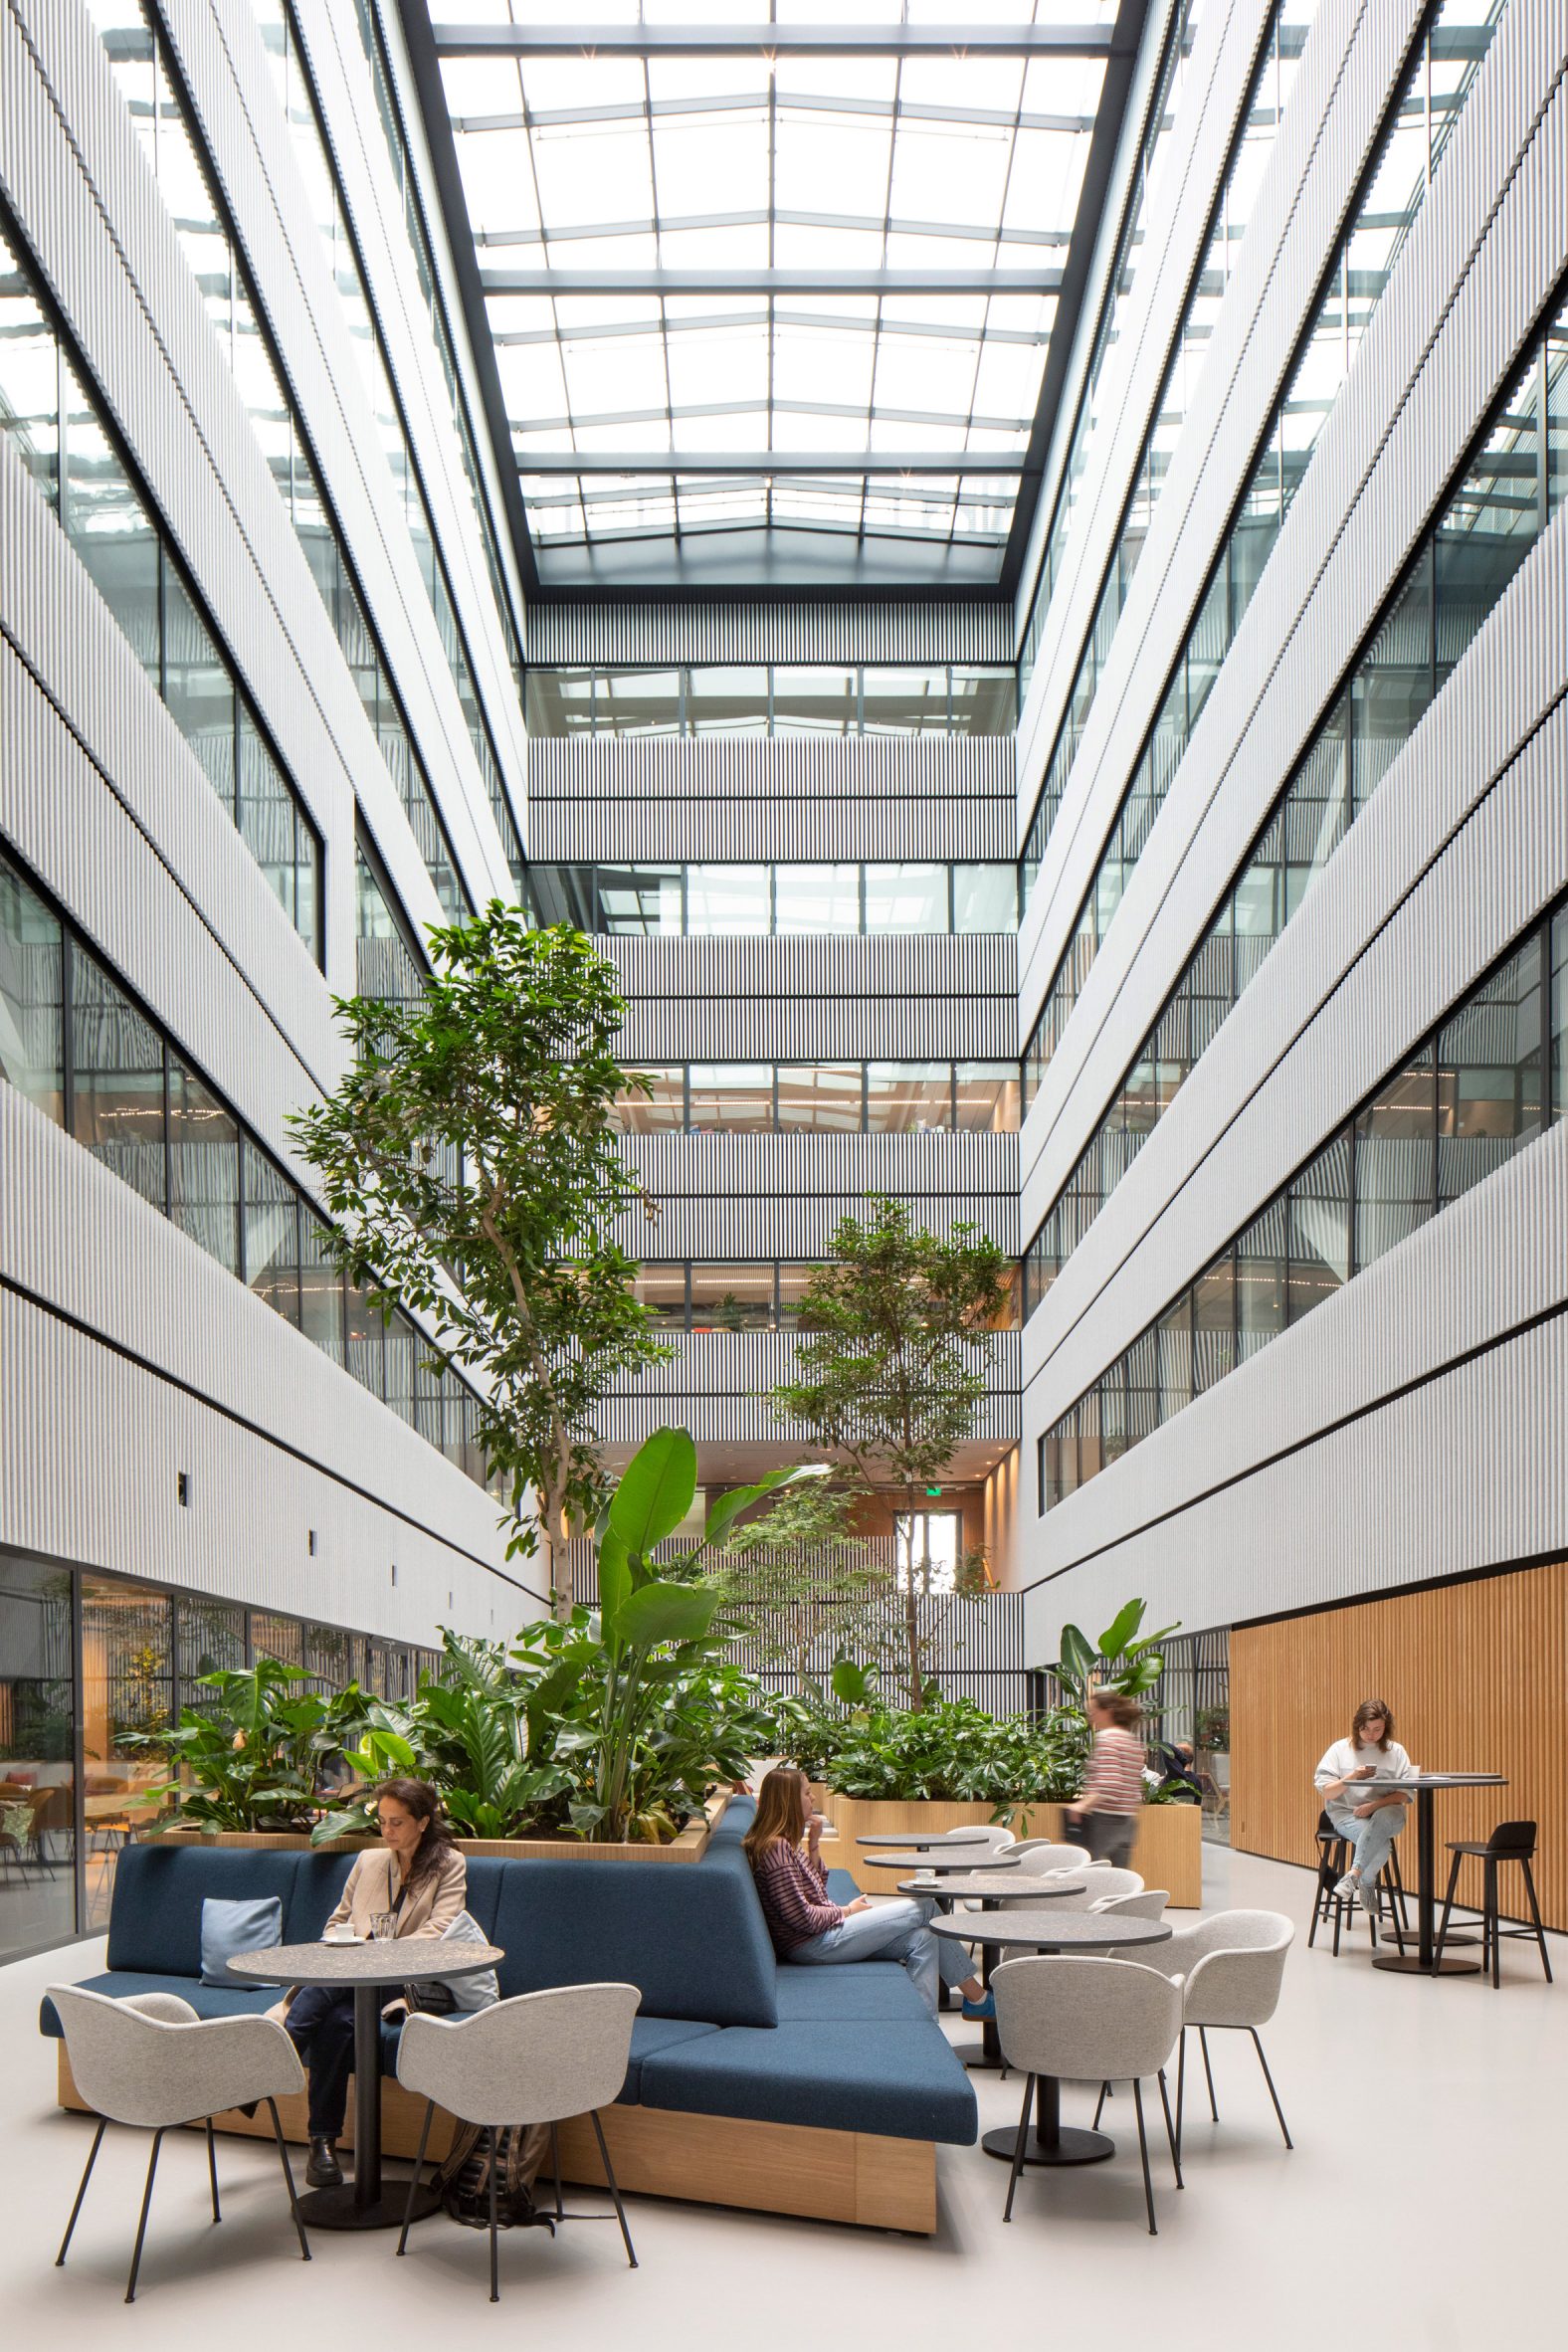 Six-storey atrium with wooden planters and bench seating